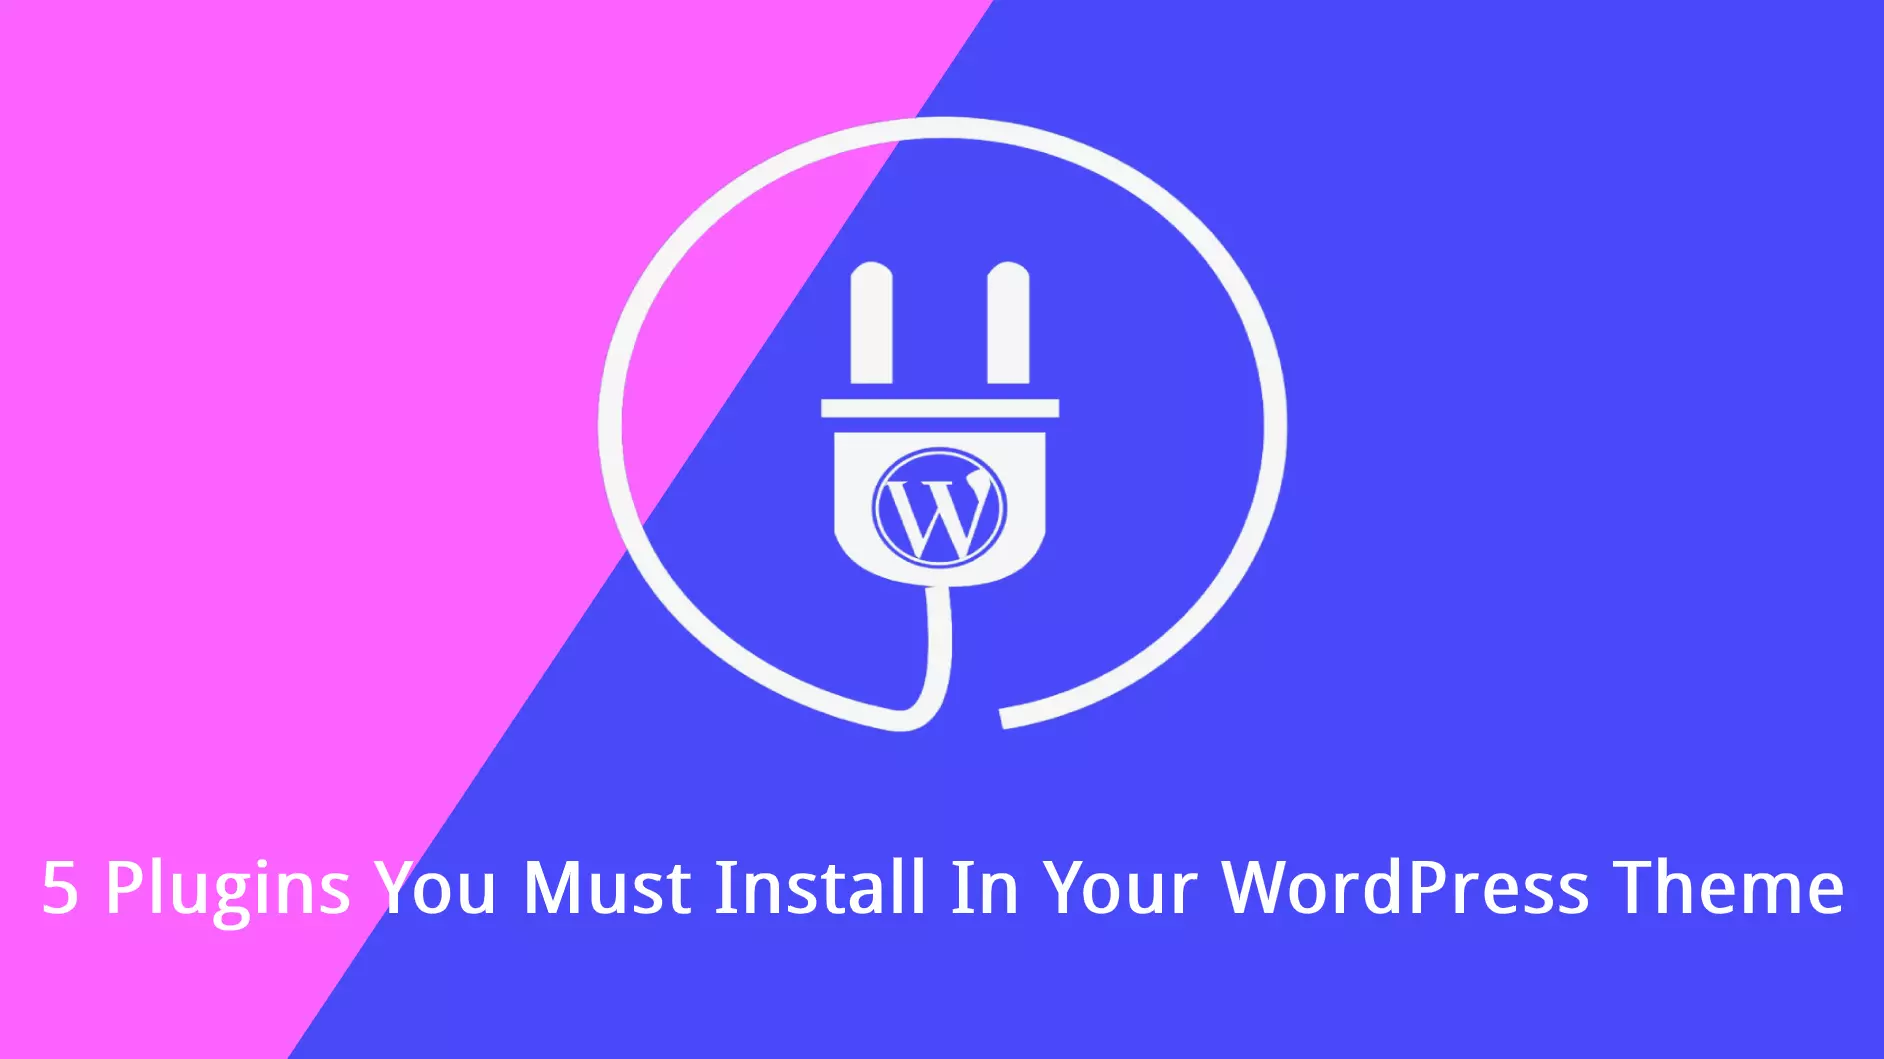 5 Plugins You Must Install In Your WordPress Theme